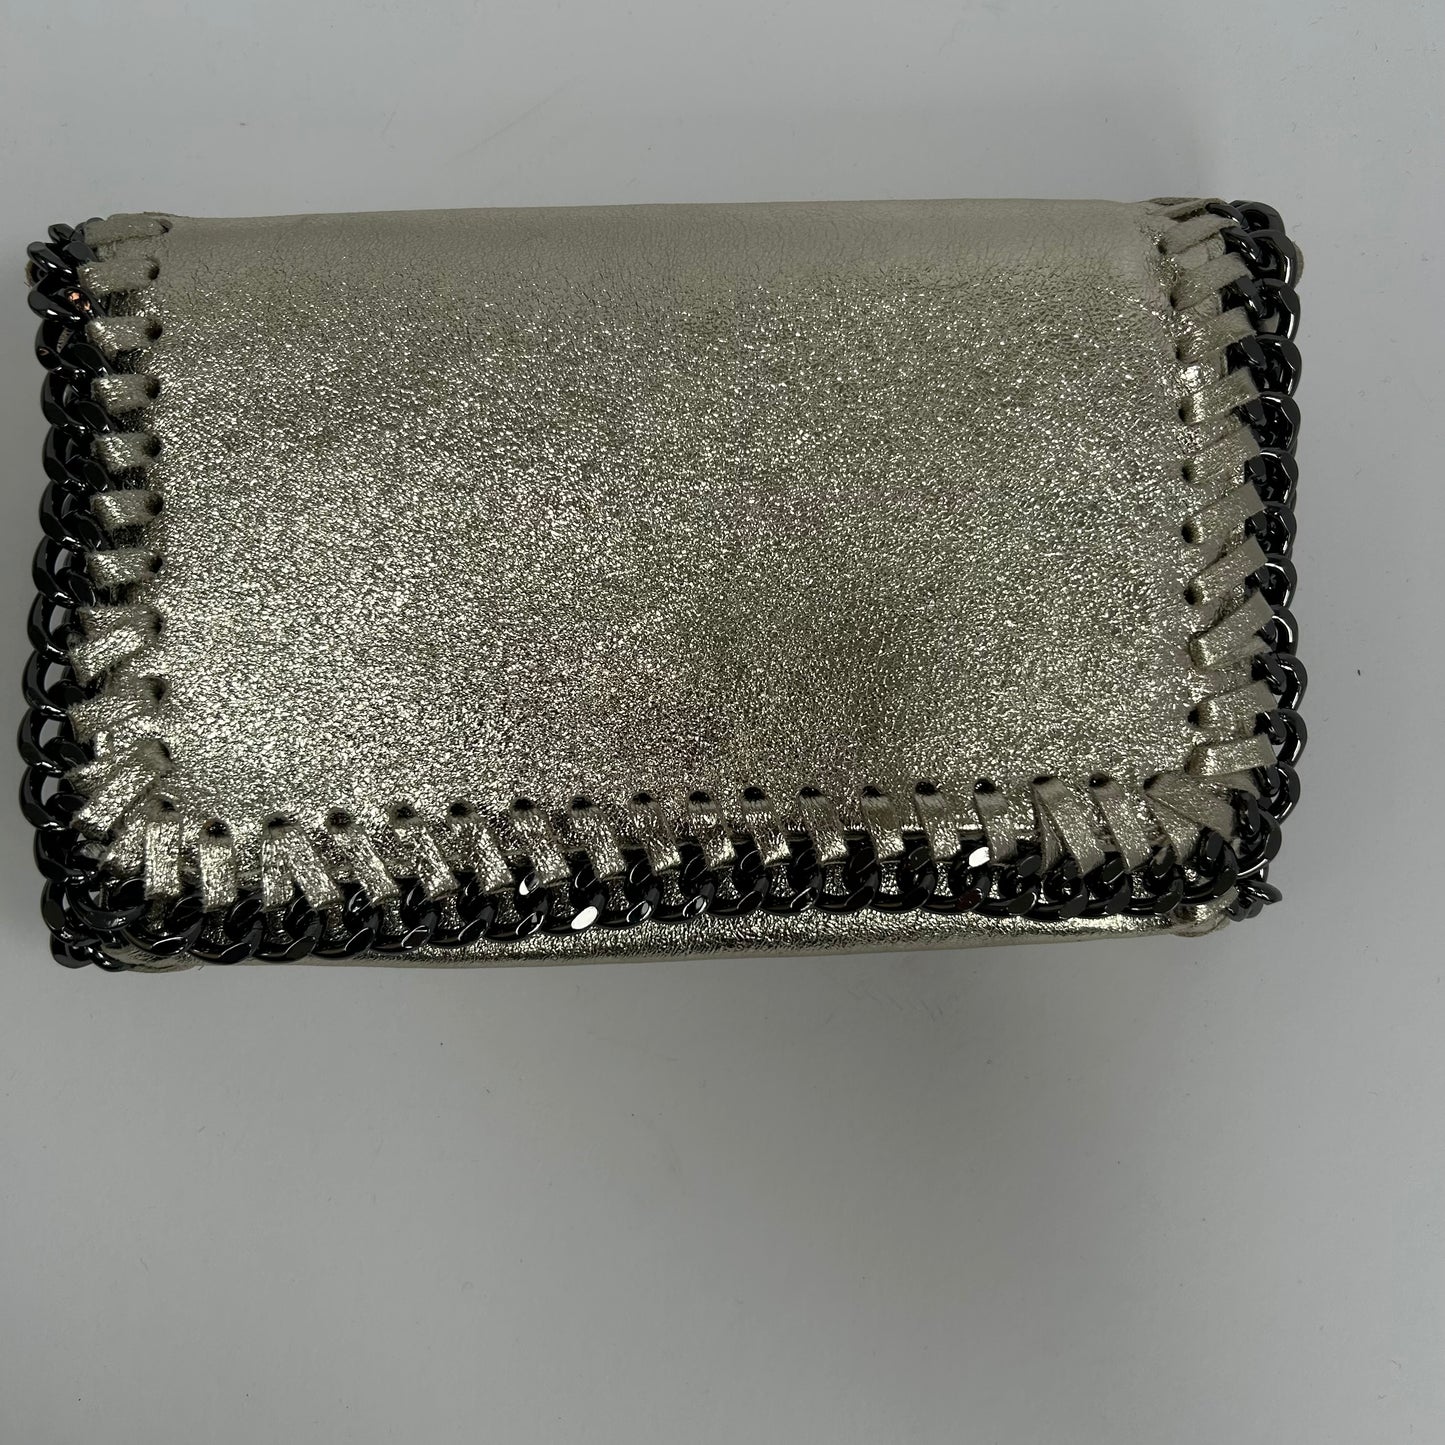 Gold and chain leather clutch / crossbody SAMPLE